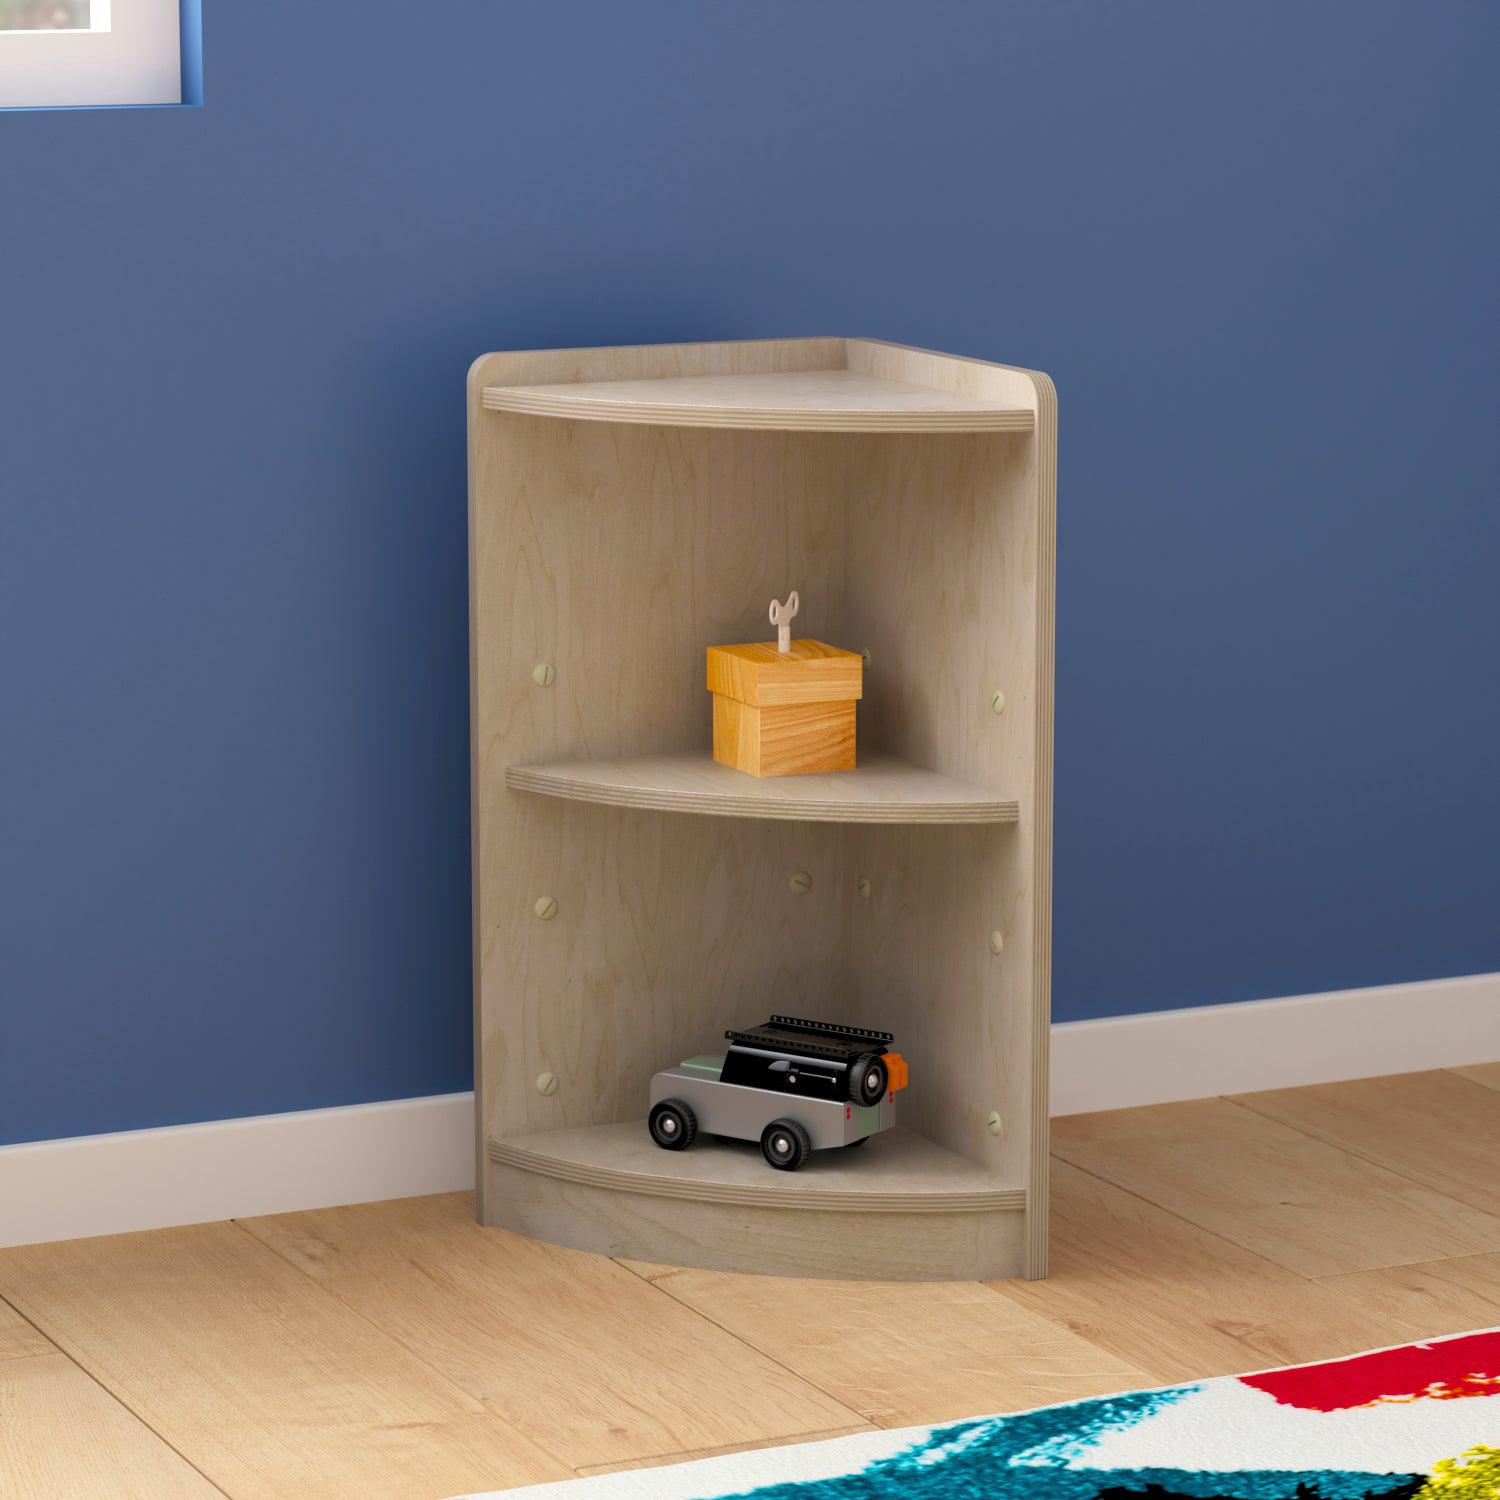 Bright Beginnings Commercial Grade 2 Tier Wooden Classroom Corner Storage Unit with Rounded Front Edges, Natural Finish